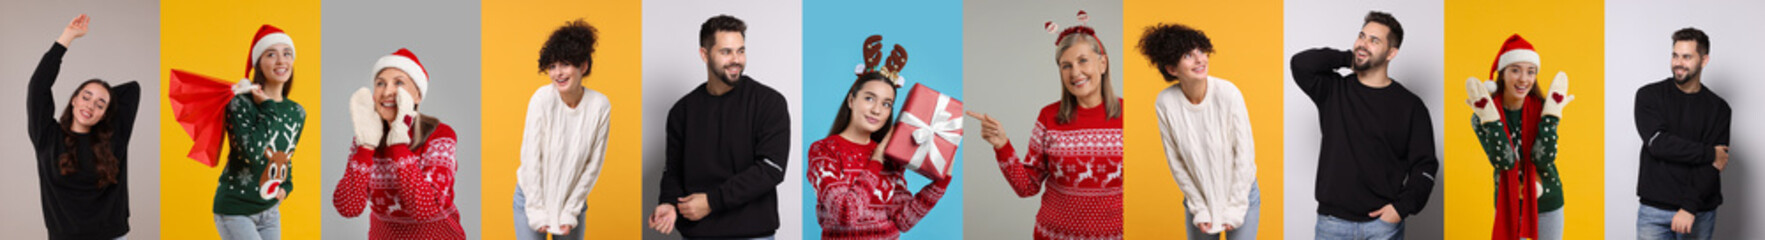 People in warm sweaters on color backgrounds, set of photos